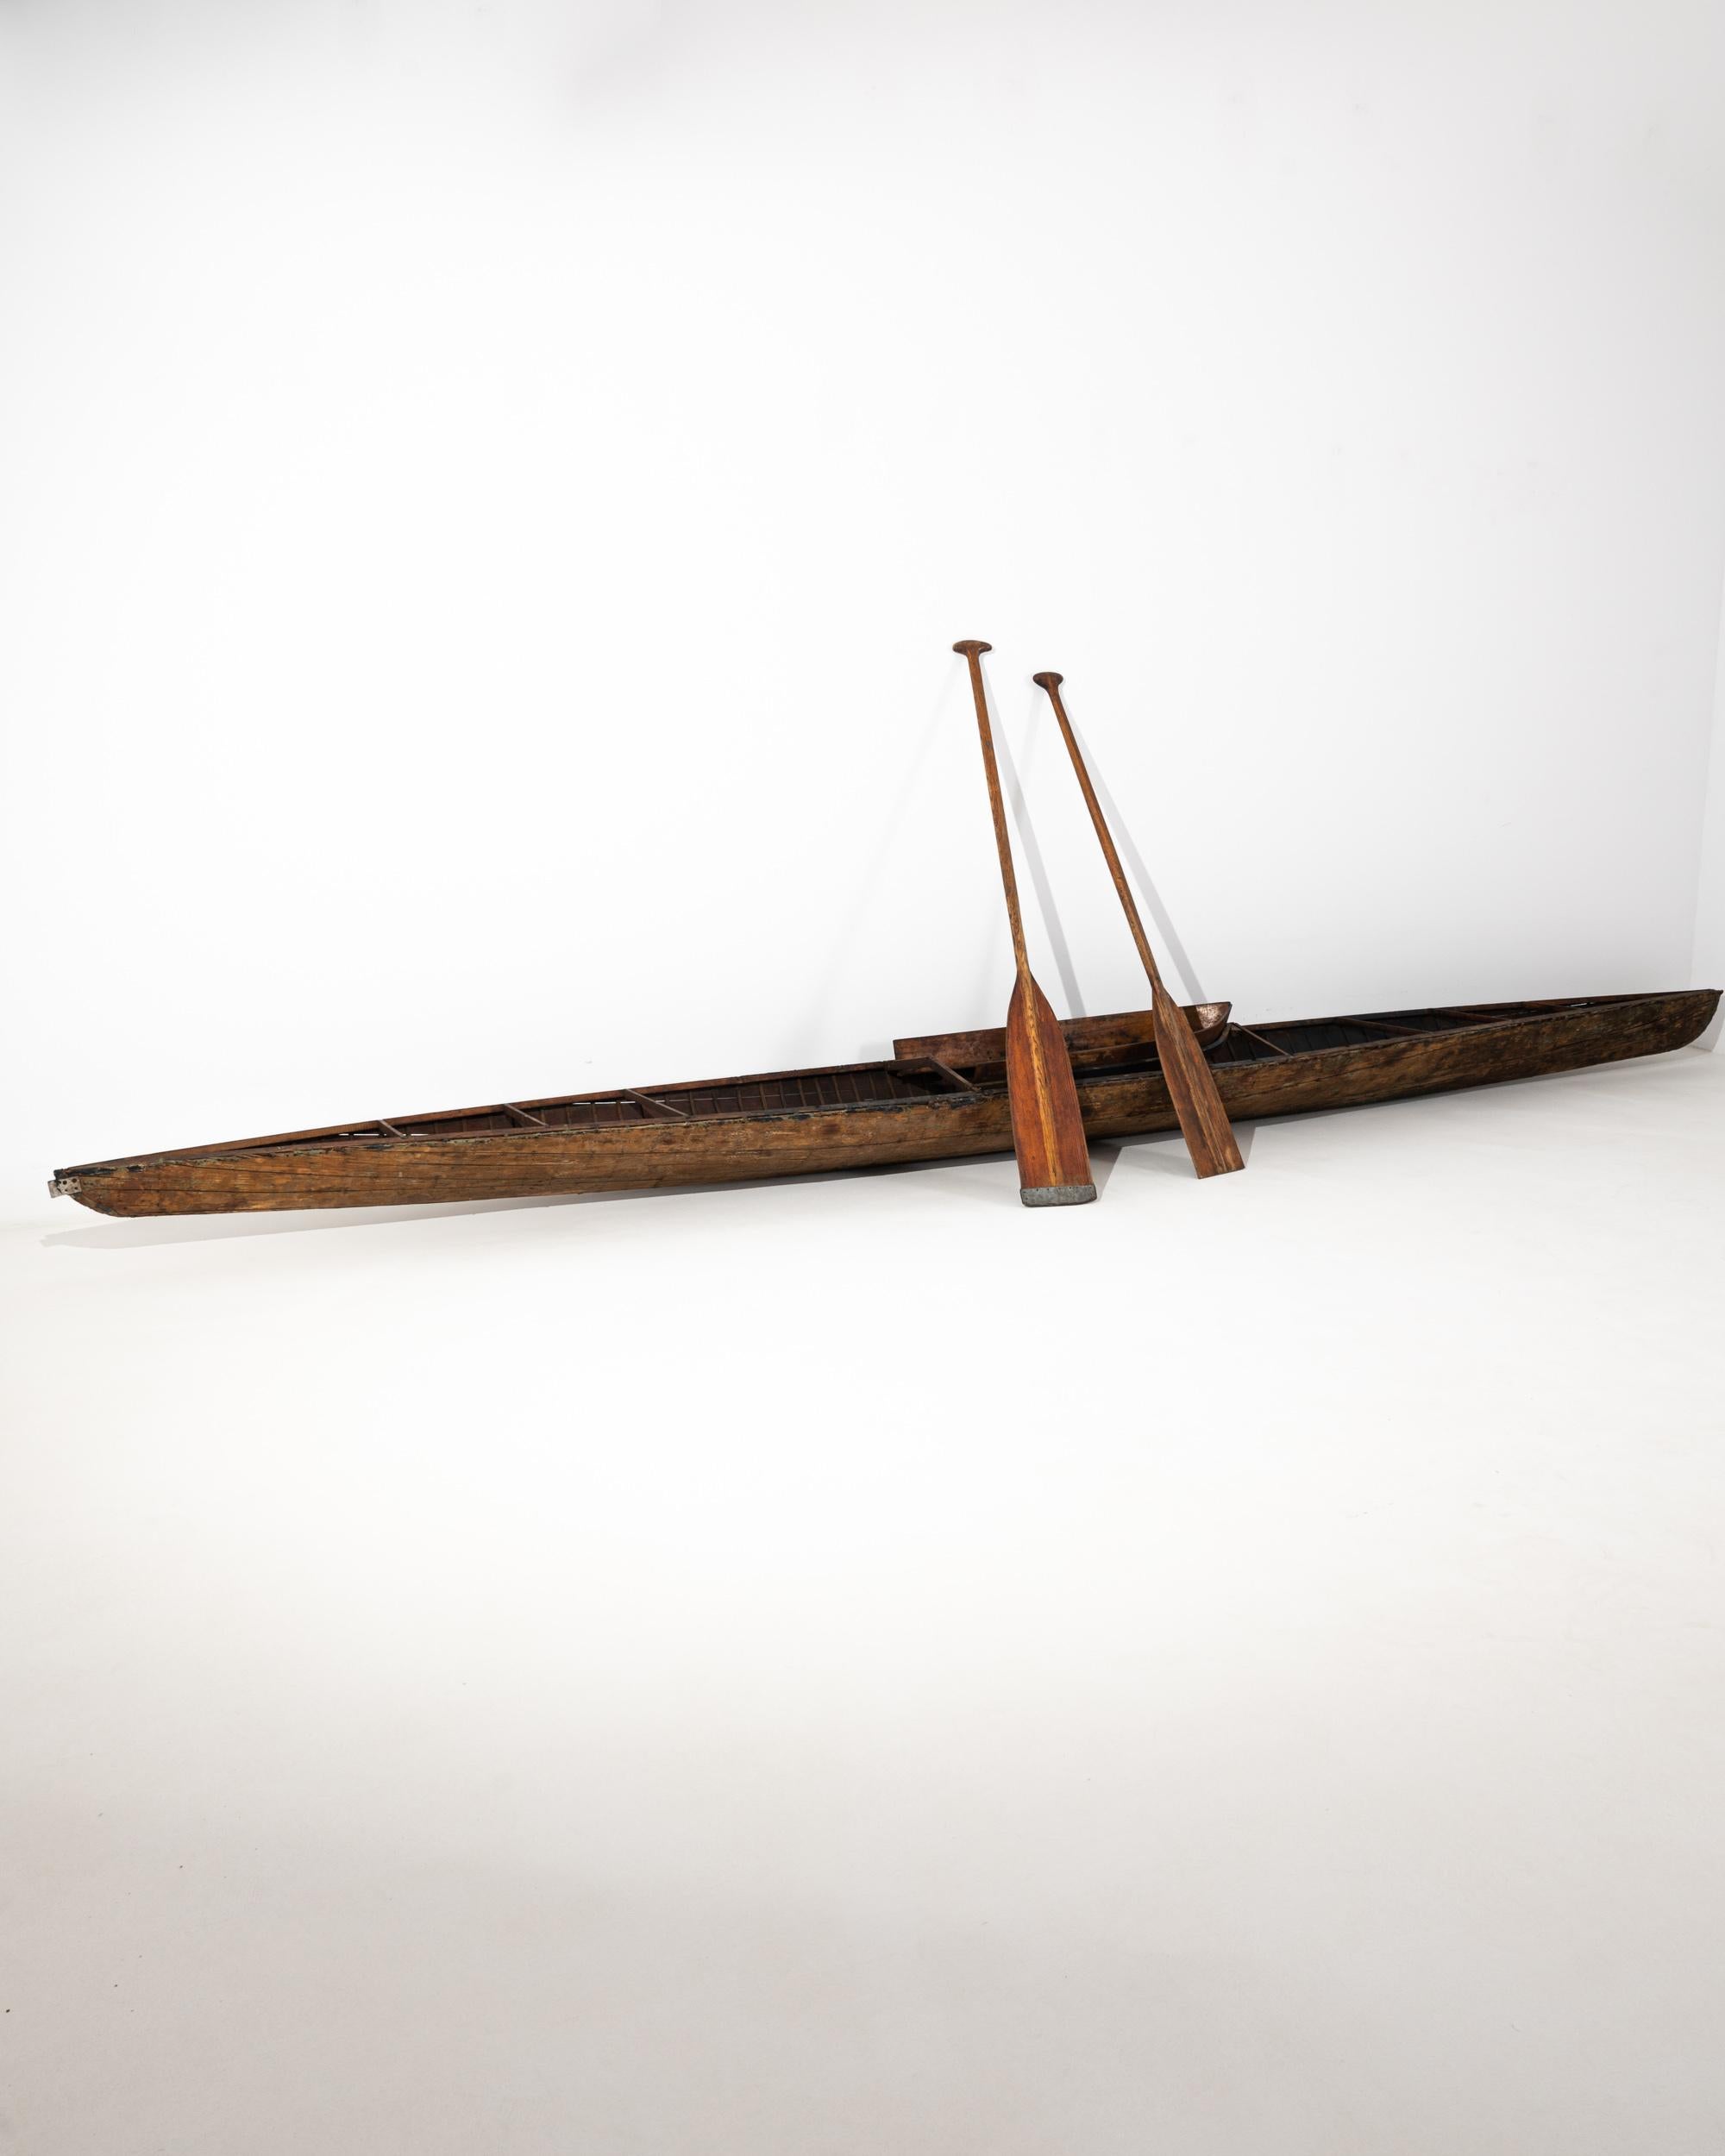 Built in Europe in the early 20th century, this wooden kayak offers a unique historic artifact. Though kayaks were first made by the indigenous peoples of the Arctic, during the 1800s kayaking became popular as a sport in Germany and France.